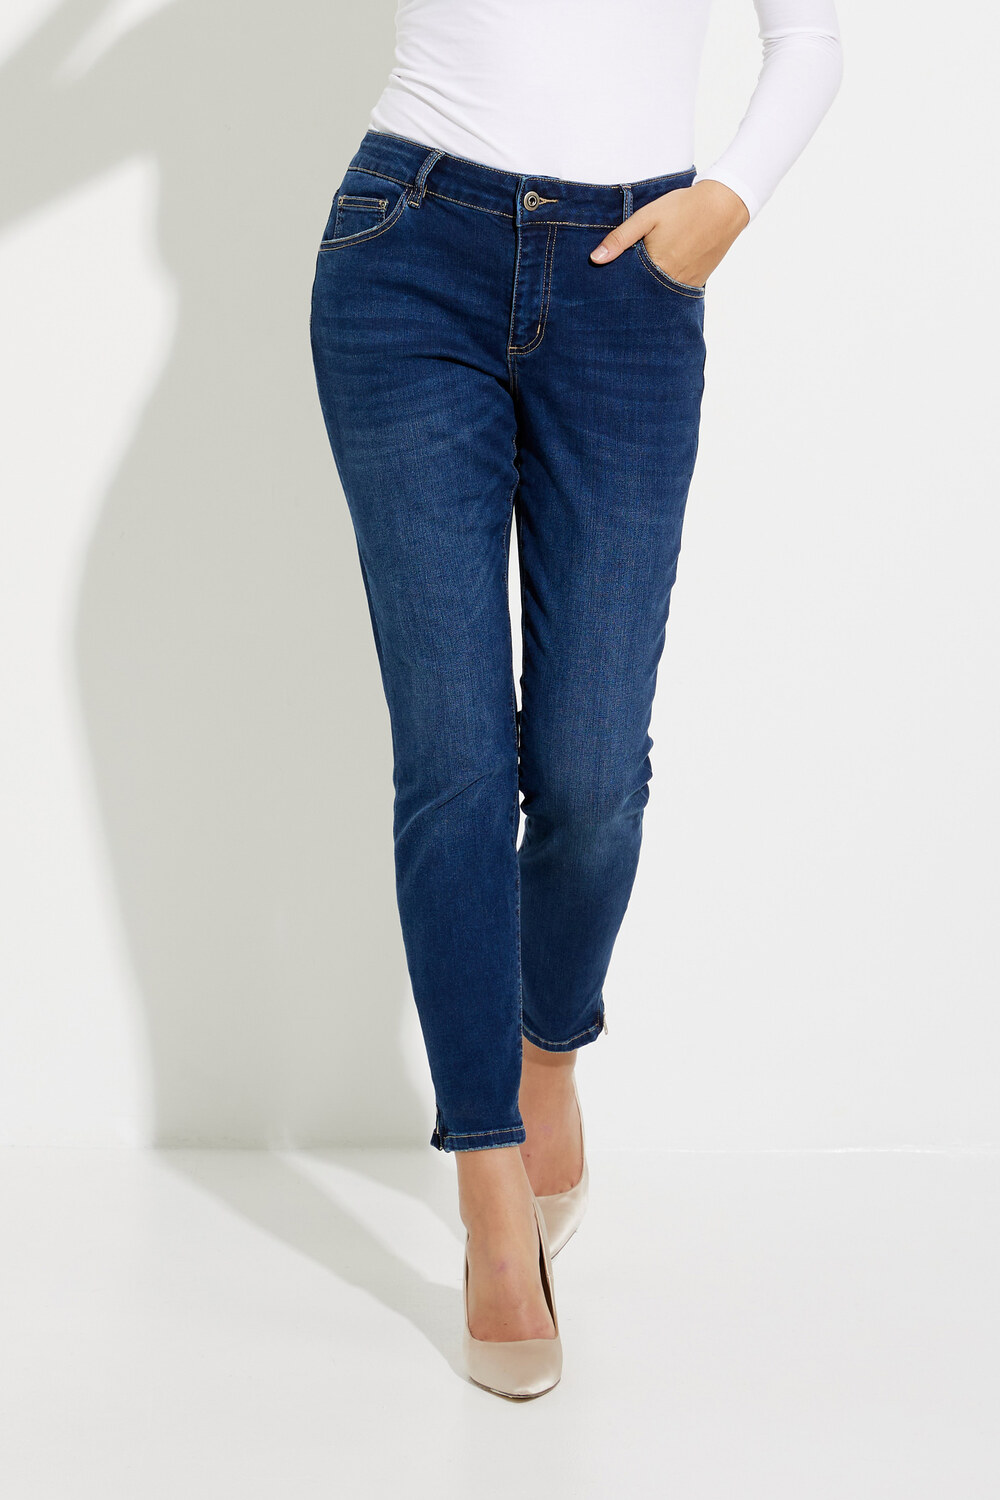 Ankle Twill Pants with Side Zipper Style C5233S. Indigo